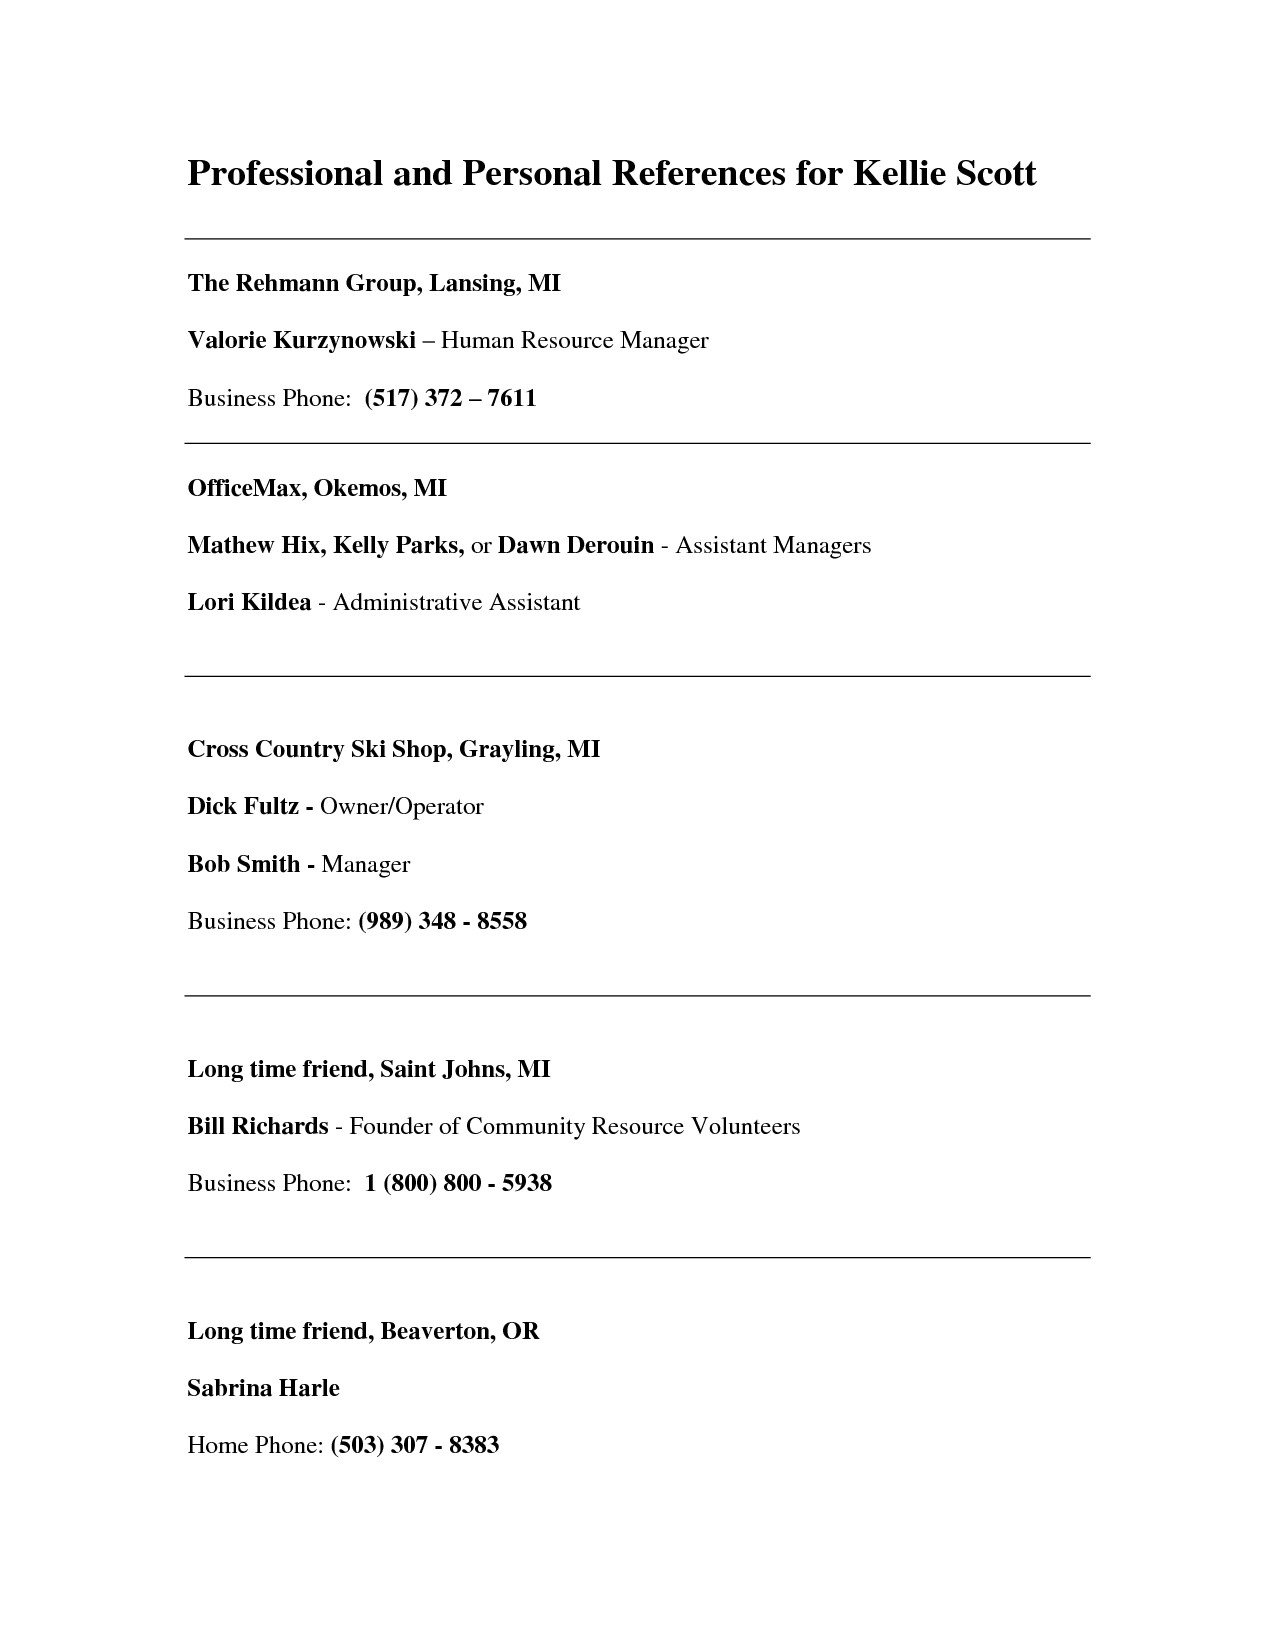 Professional Reference List Template Professional References Template